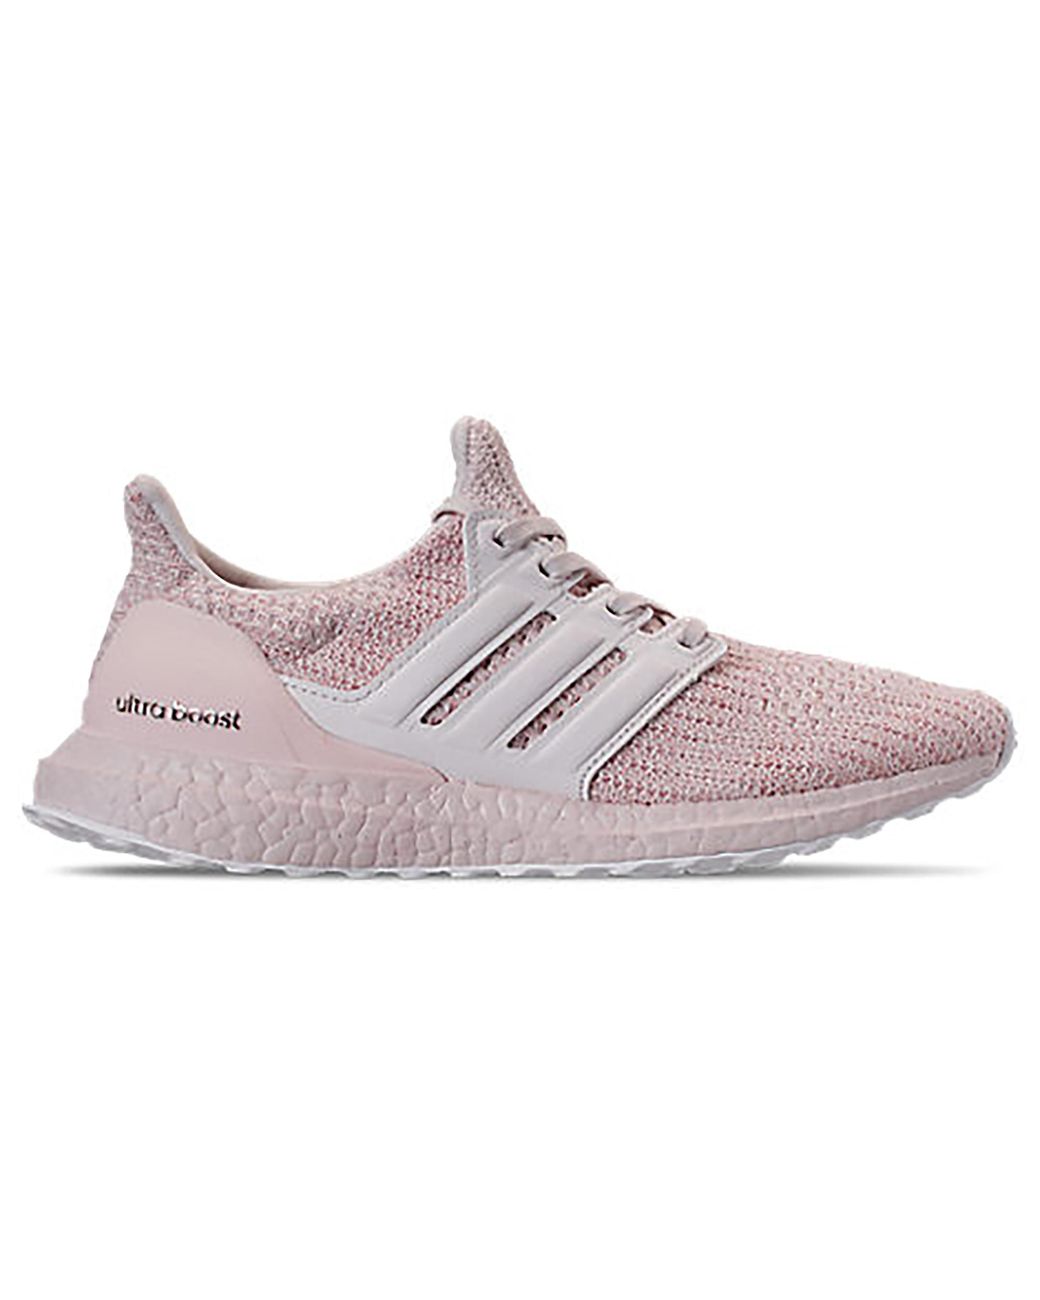 ultra boost orchid tint women's